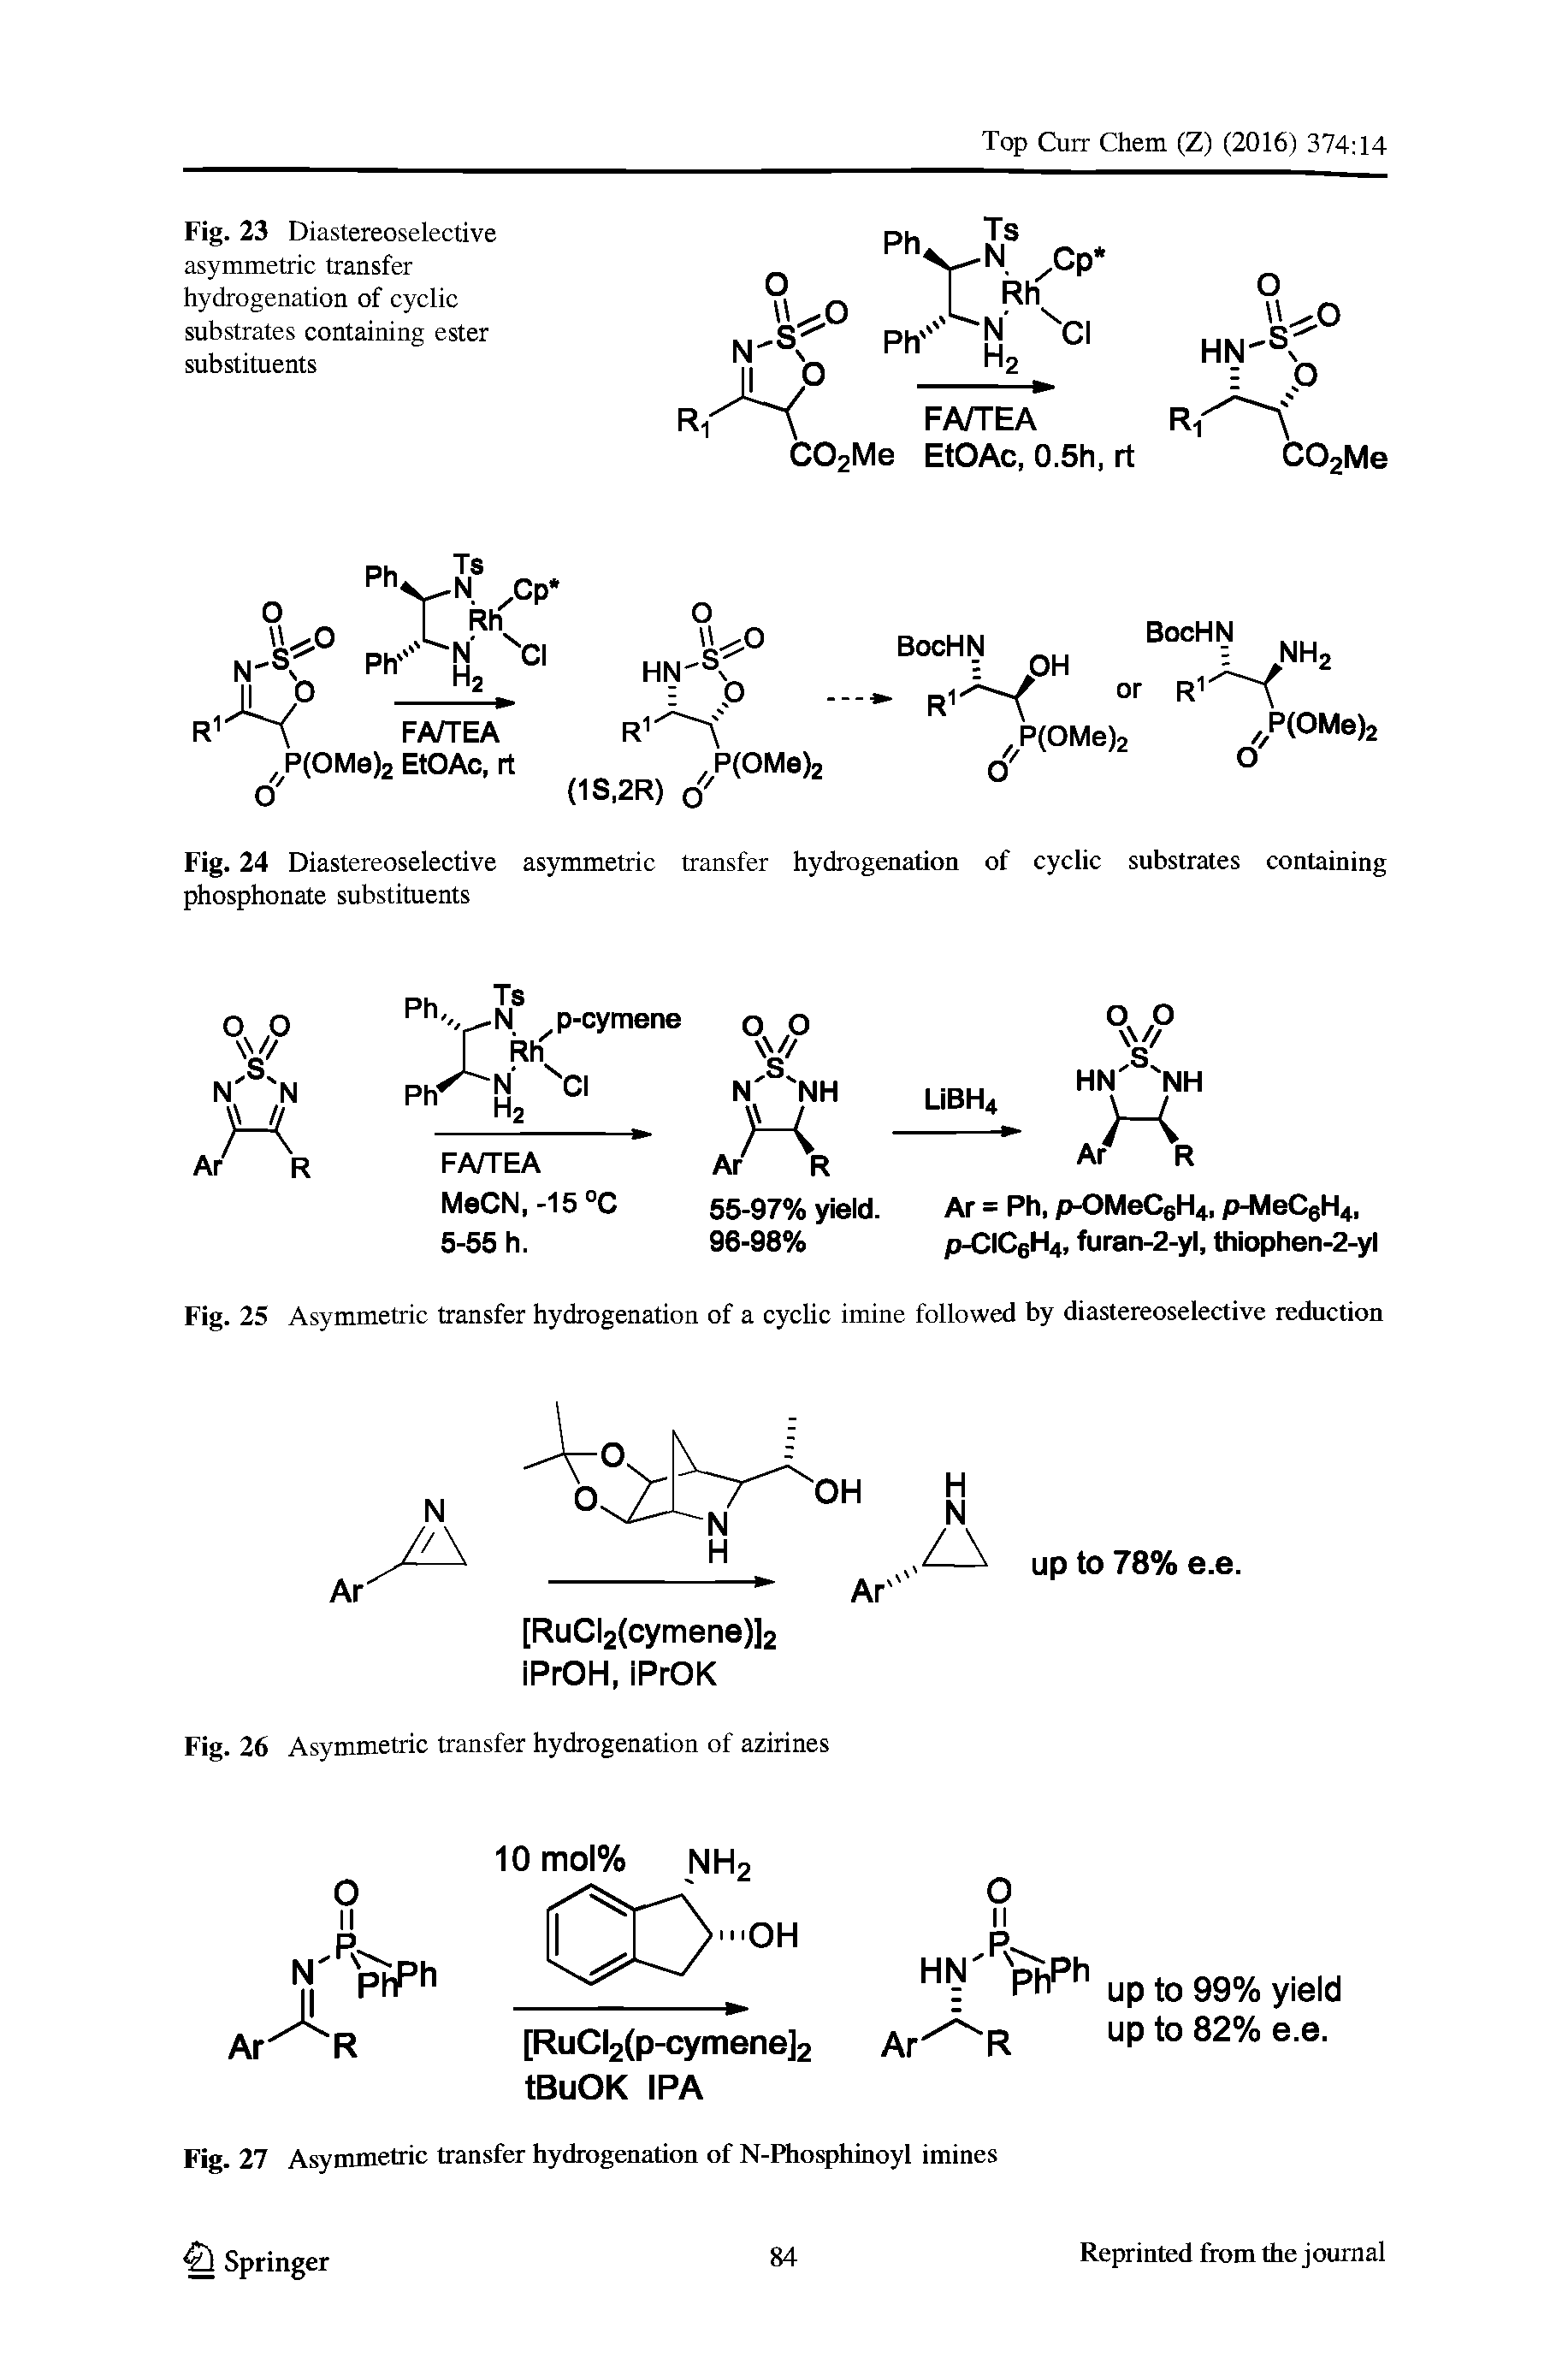 Fig. 25 Asymmetric transfer hydrogenation of a cyclic imine followed by diastereoselective reduction...